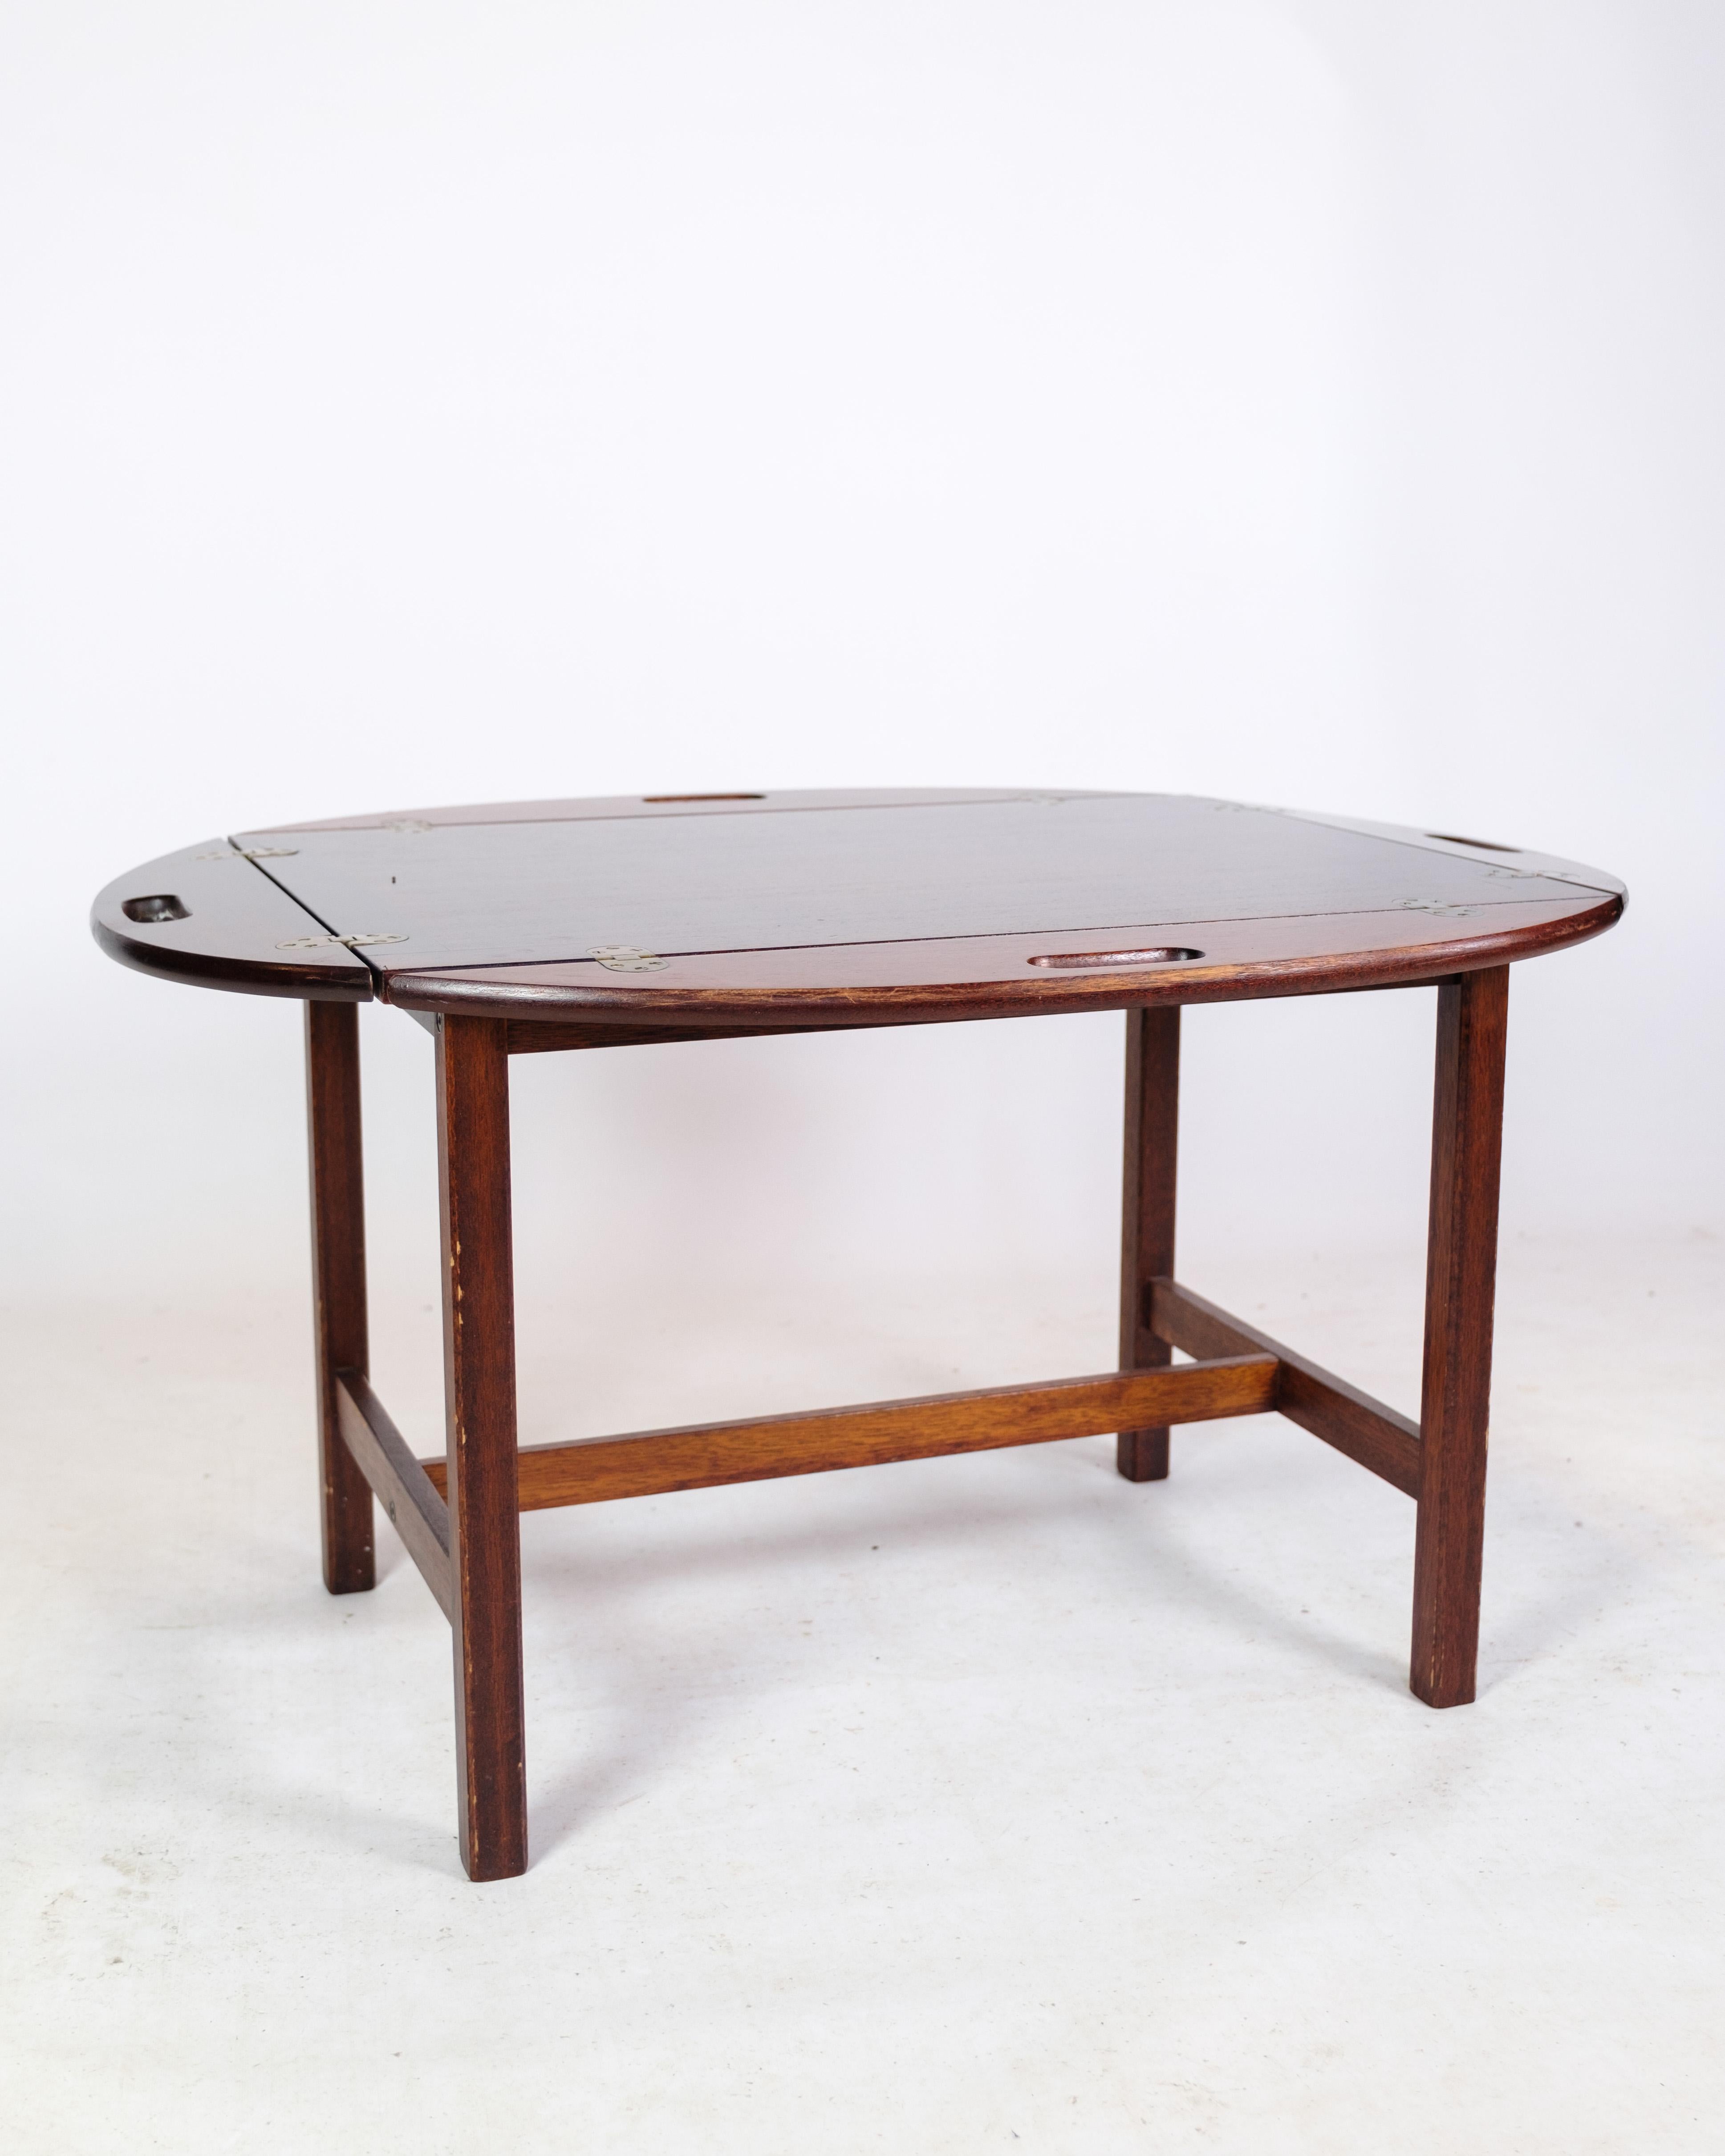 Butler table in mahogany of Danish design with brass fittings from around the 1950s.
Measurements in cm: H:49 W:90.5 D:73